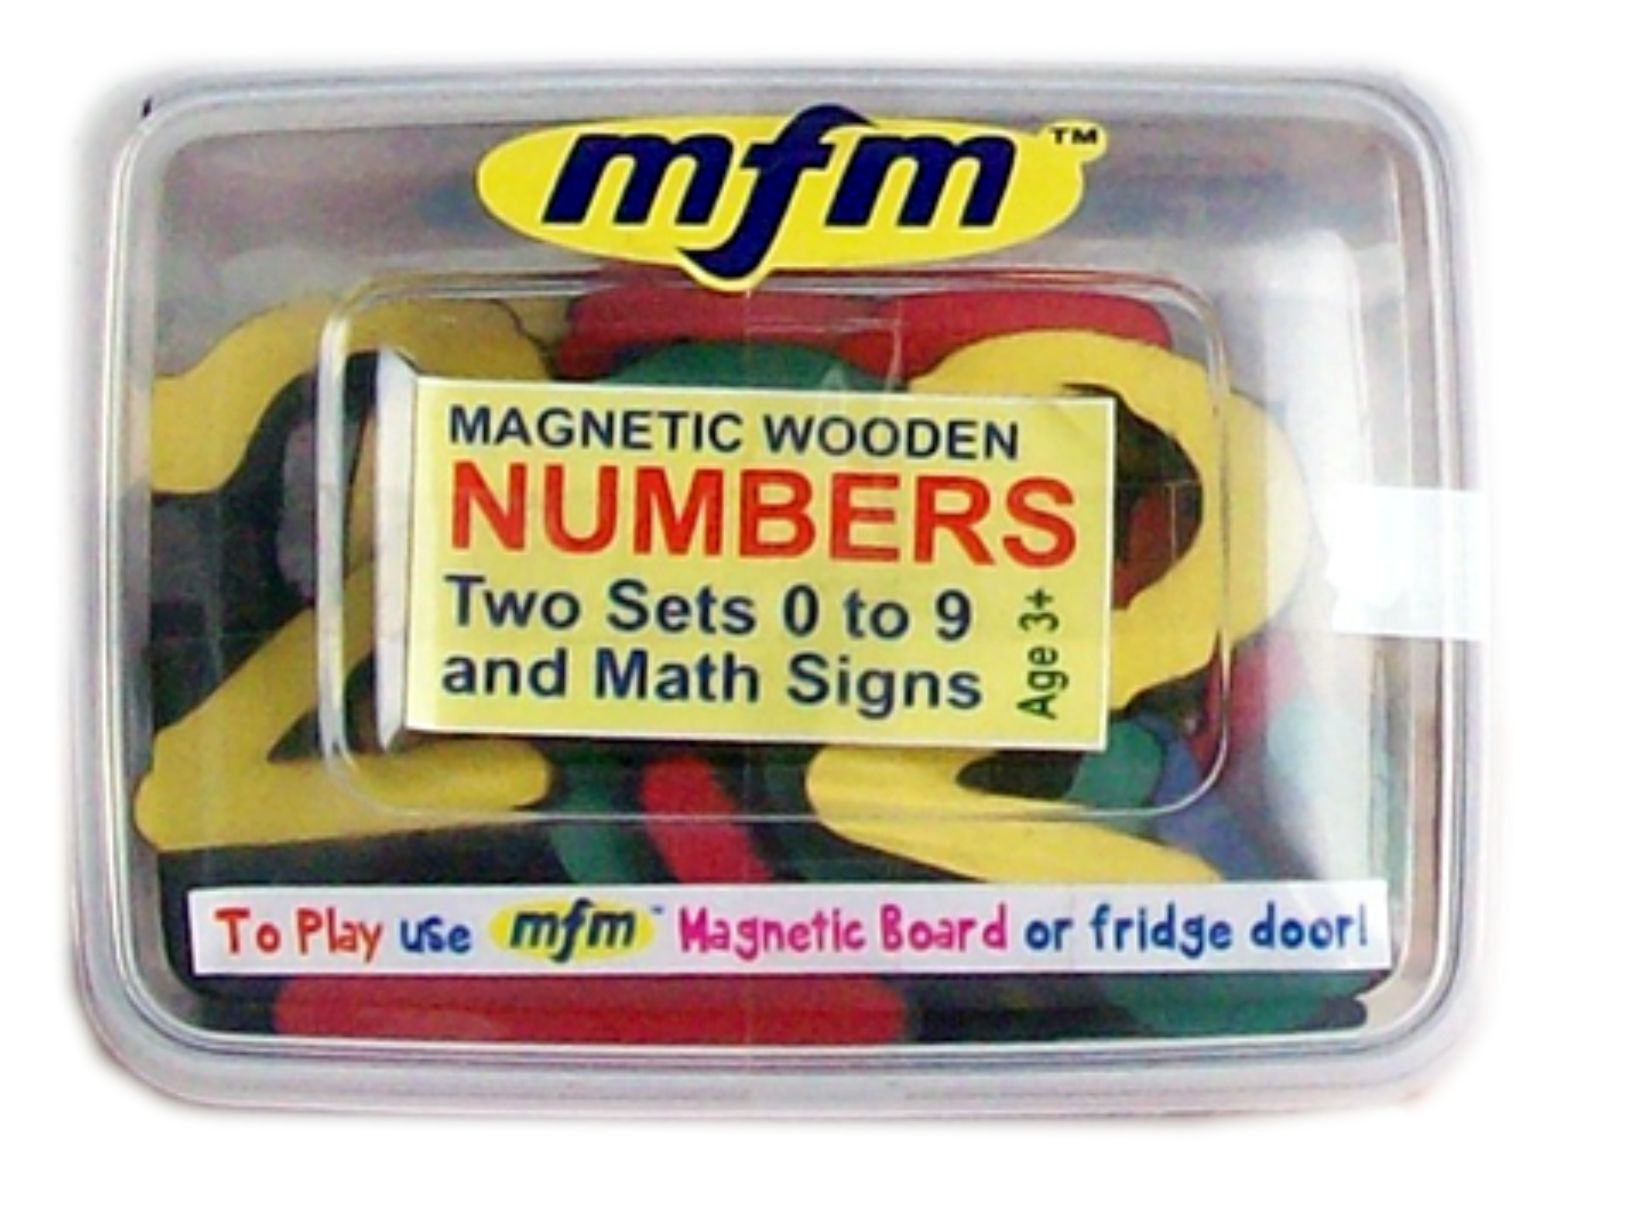 Set of magnetic wooden numbers 0-9 by mfm toys india